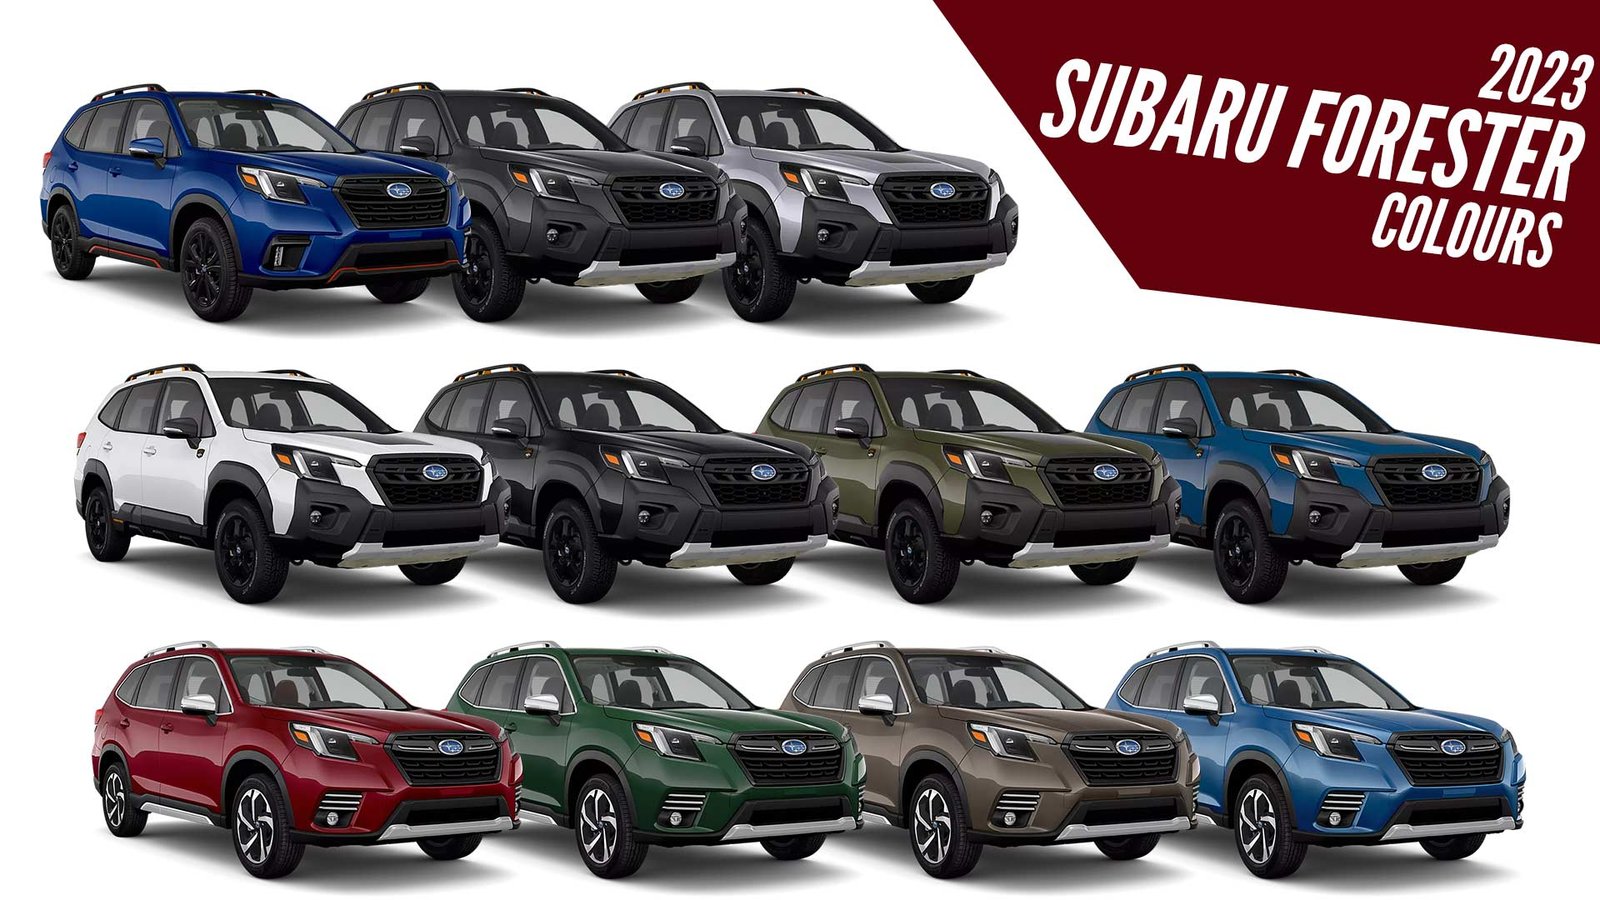 2023 Subaru Forester Color Options